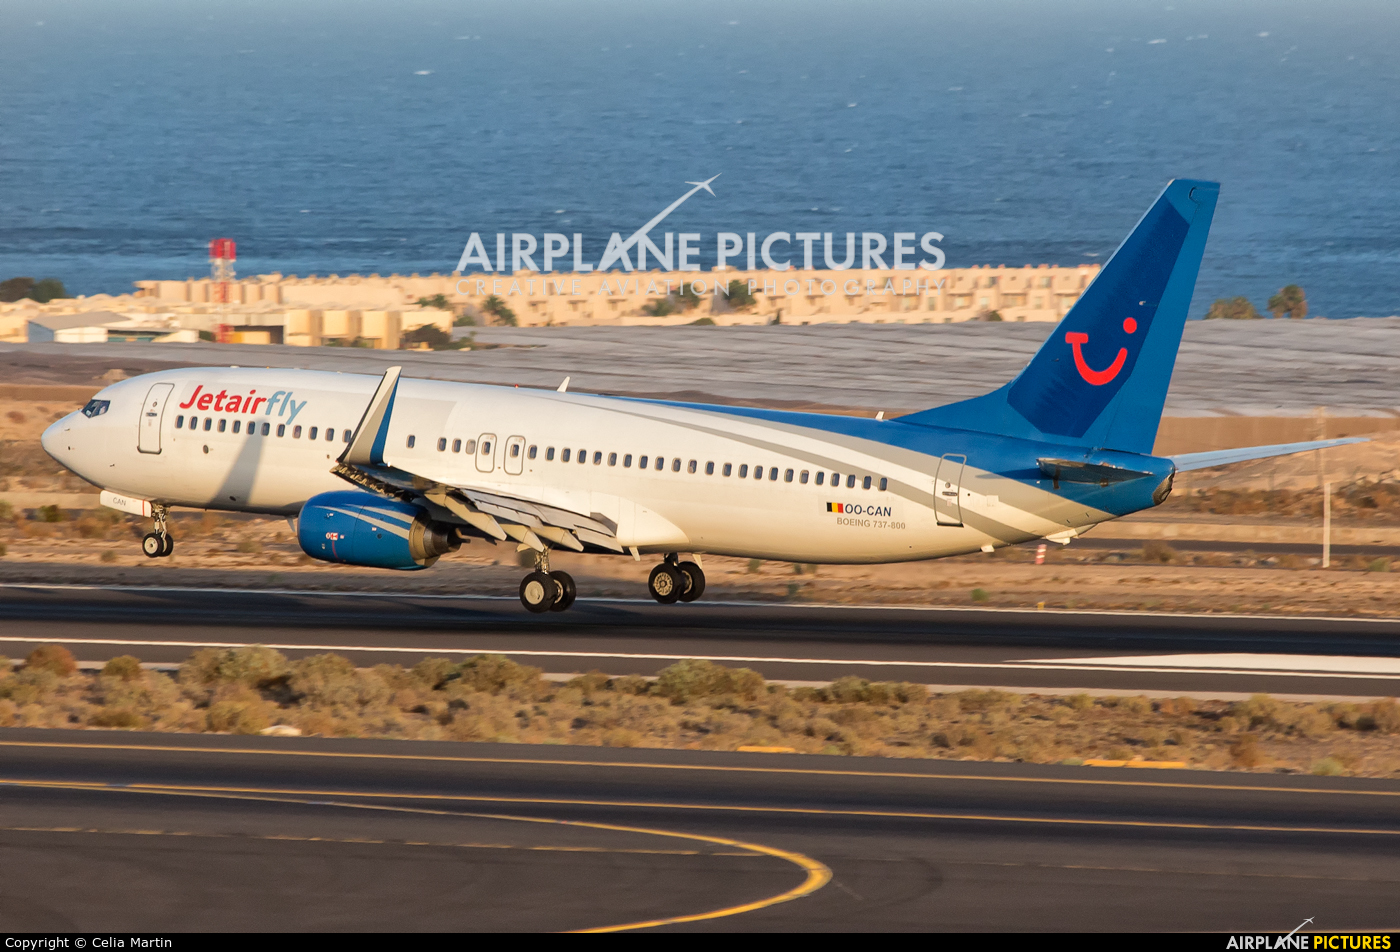 Jetairfly (TUI Airlines Belgium) OO-CAN aircraft at Tenerife Sur - Reina Sofia